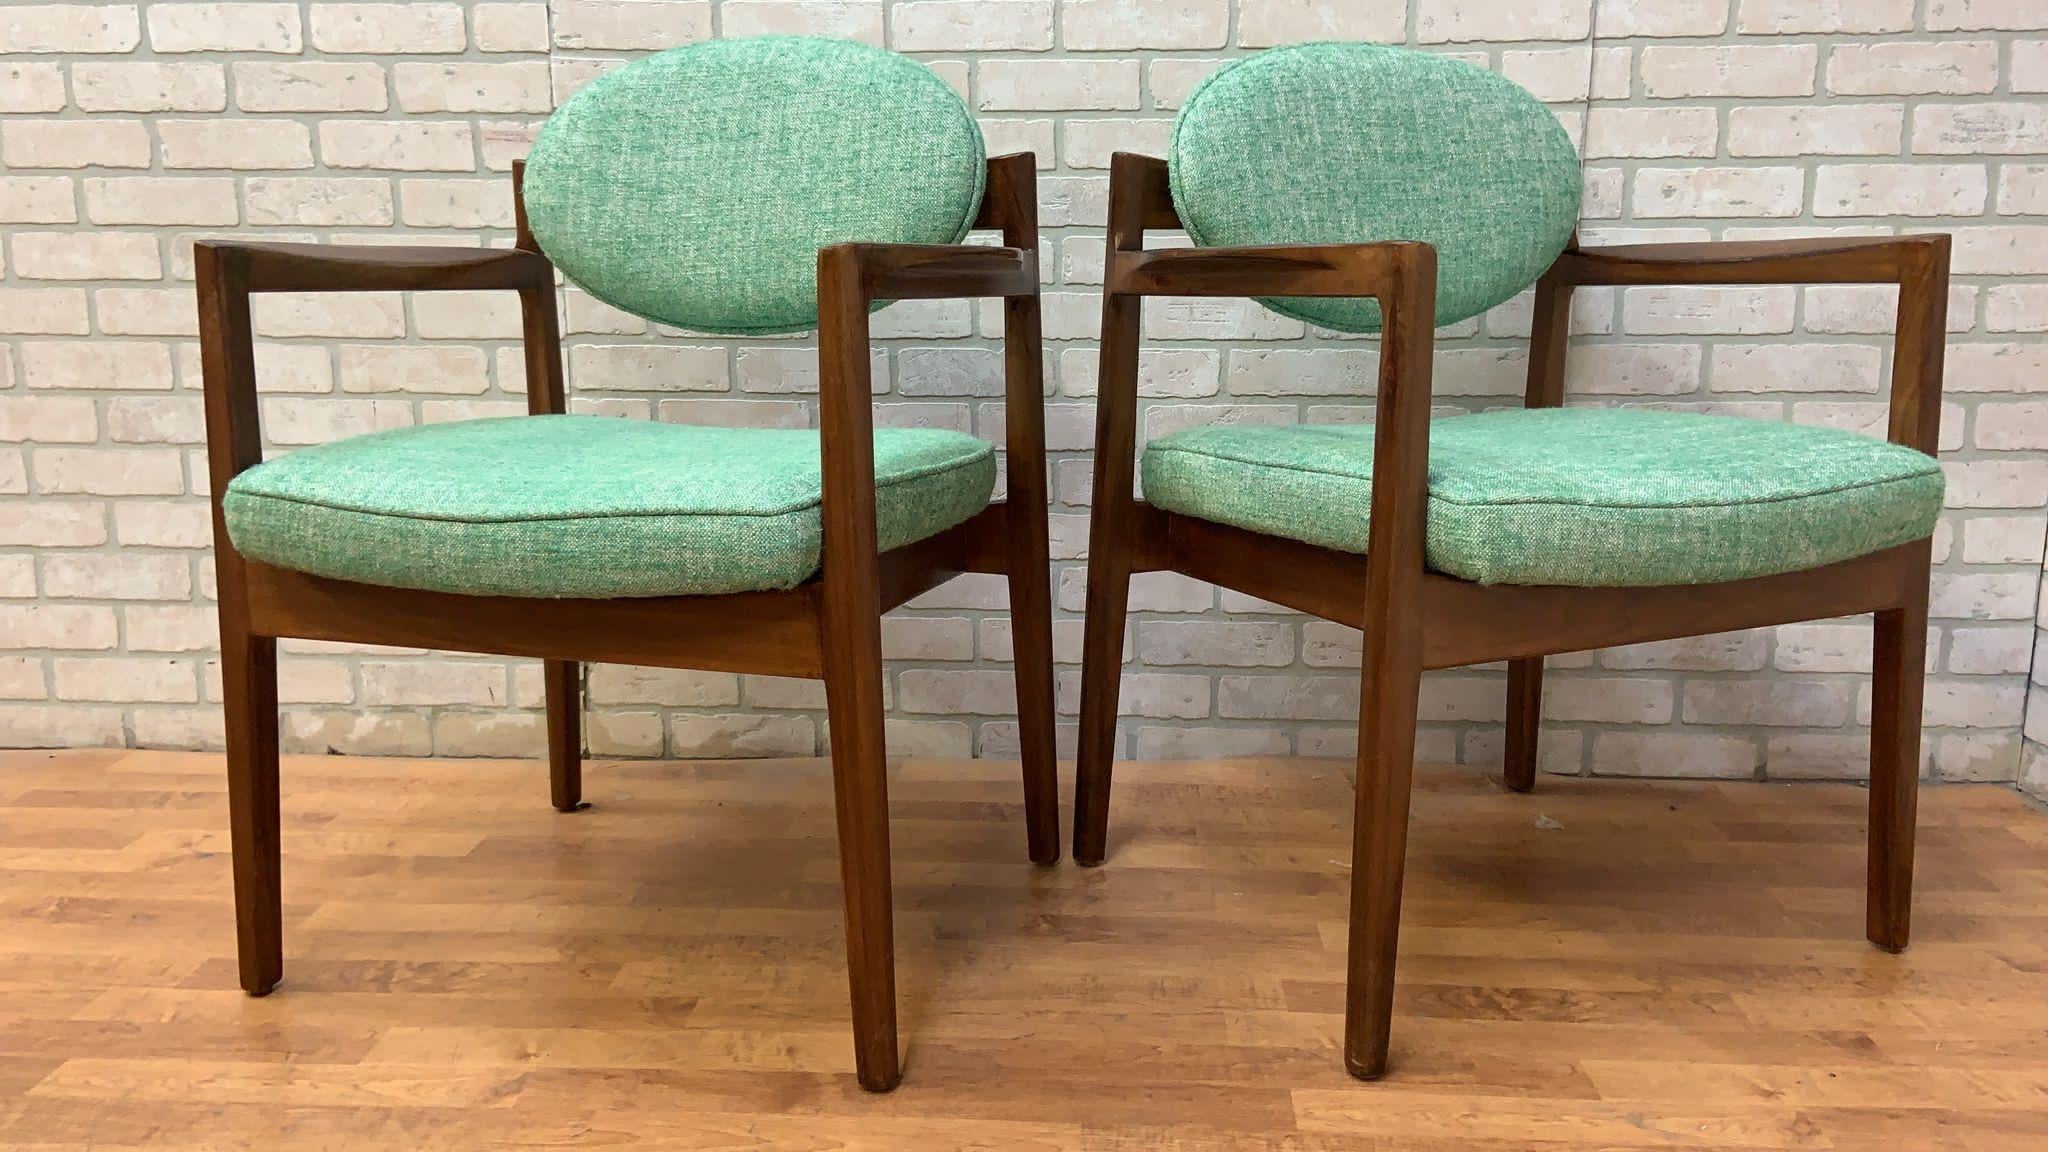 Hand-Crafted Mid Century Modern Armchairs 'Oval-Back' by Jens Risom - Pair For Sale